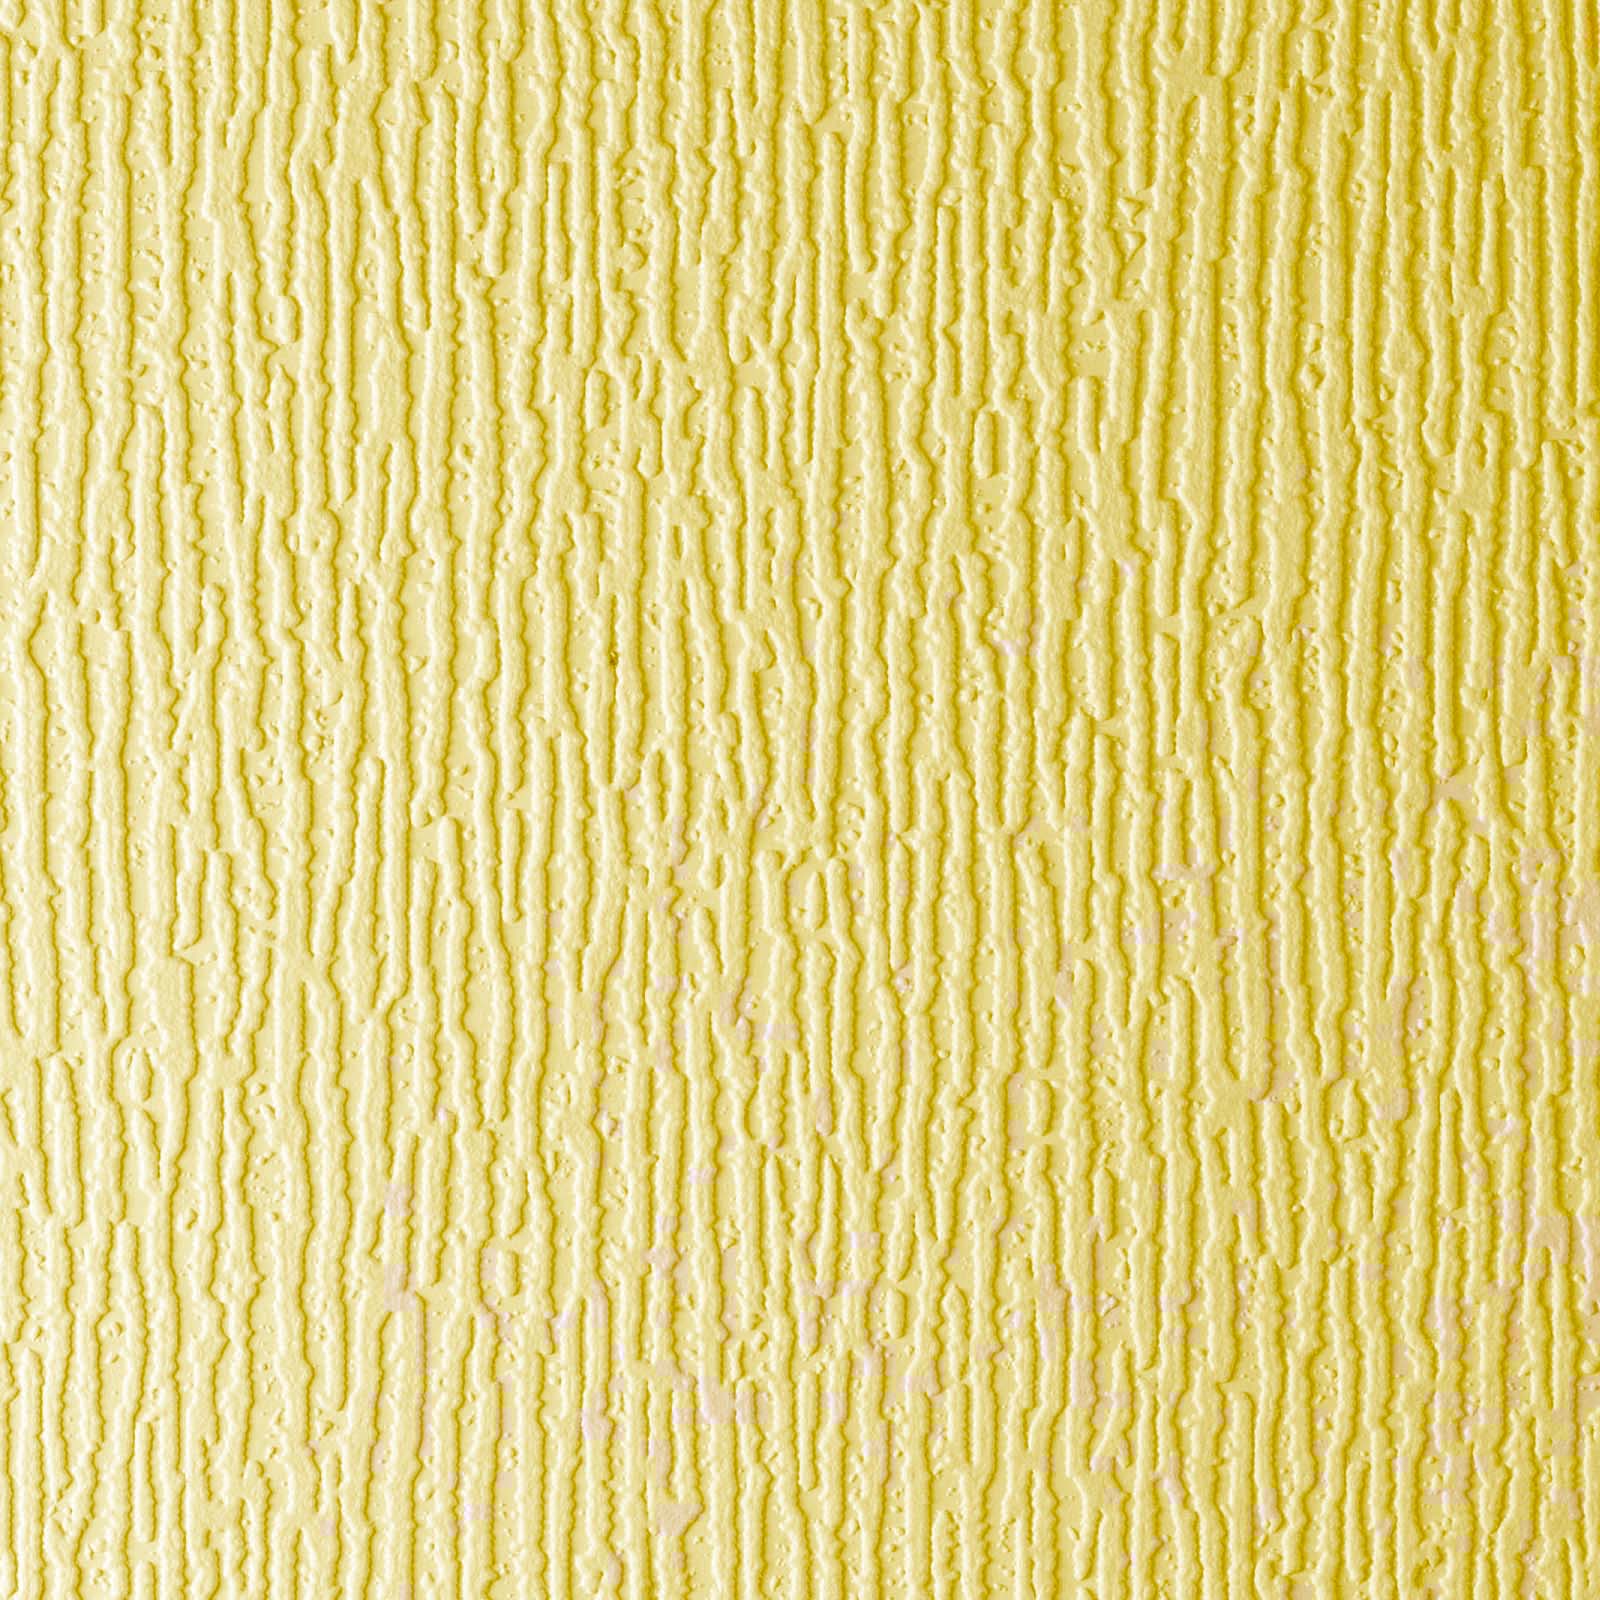 Abstract Art Handpainted Background In Lemon Yellow Color Stock Photo -  Download Image Now - iStock